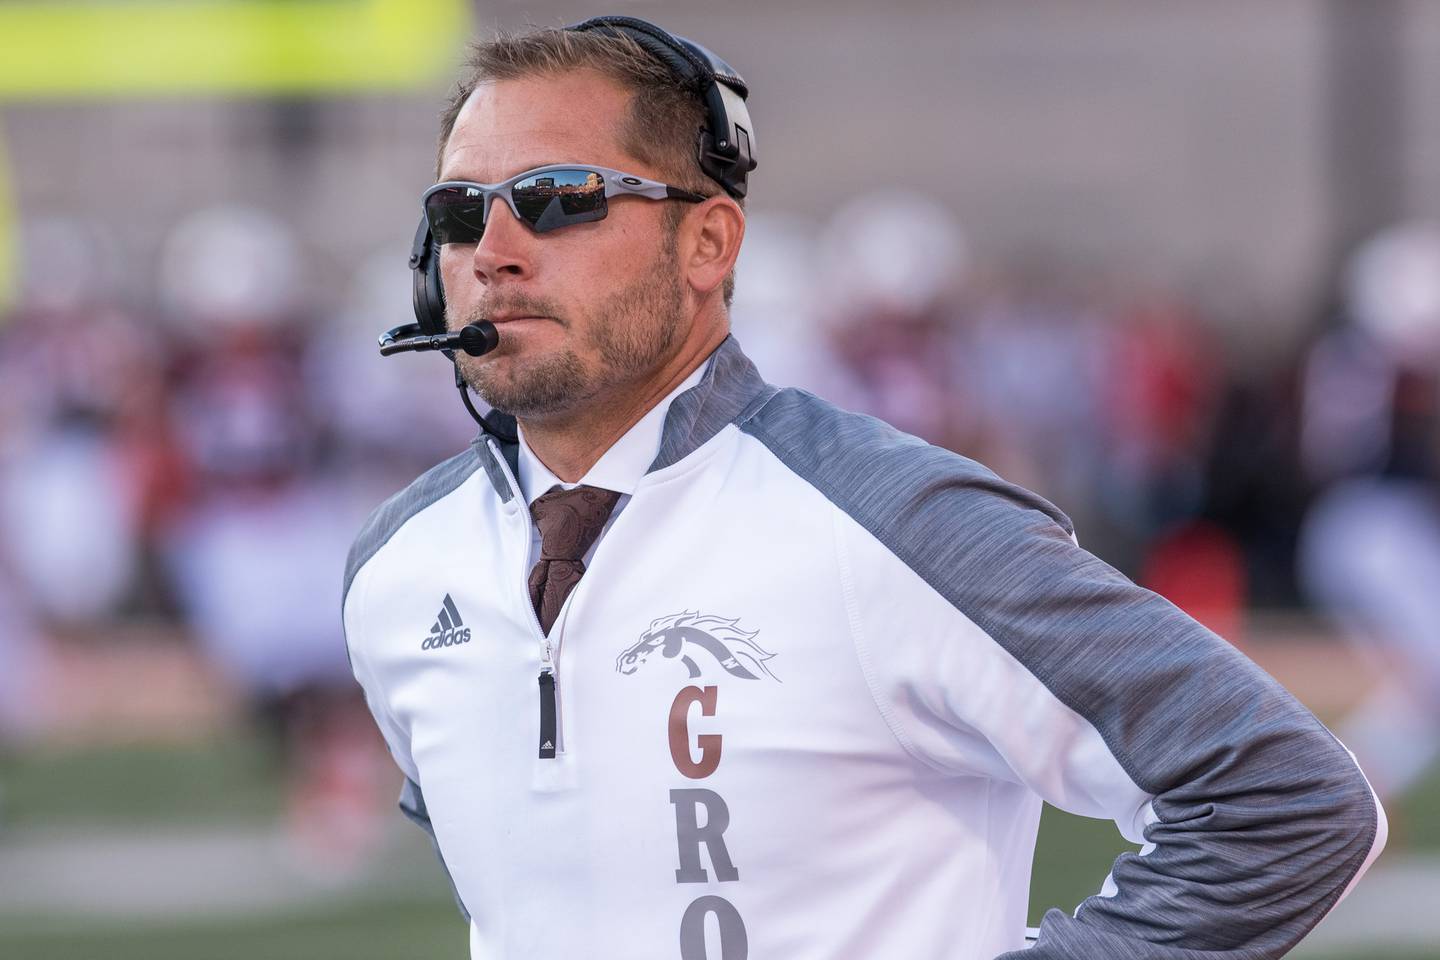 Western Michigan coach P.J. Fleck watches from the sideline during the third quarter against Illinois on Sept. 17, 2016, at Memorial Stadium in Champaign.